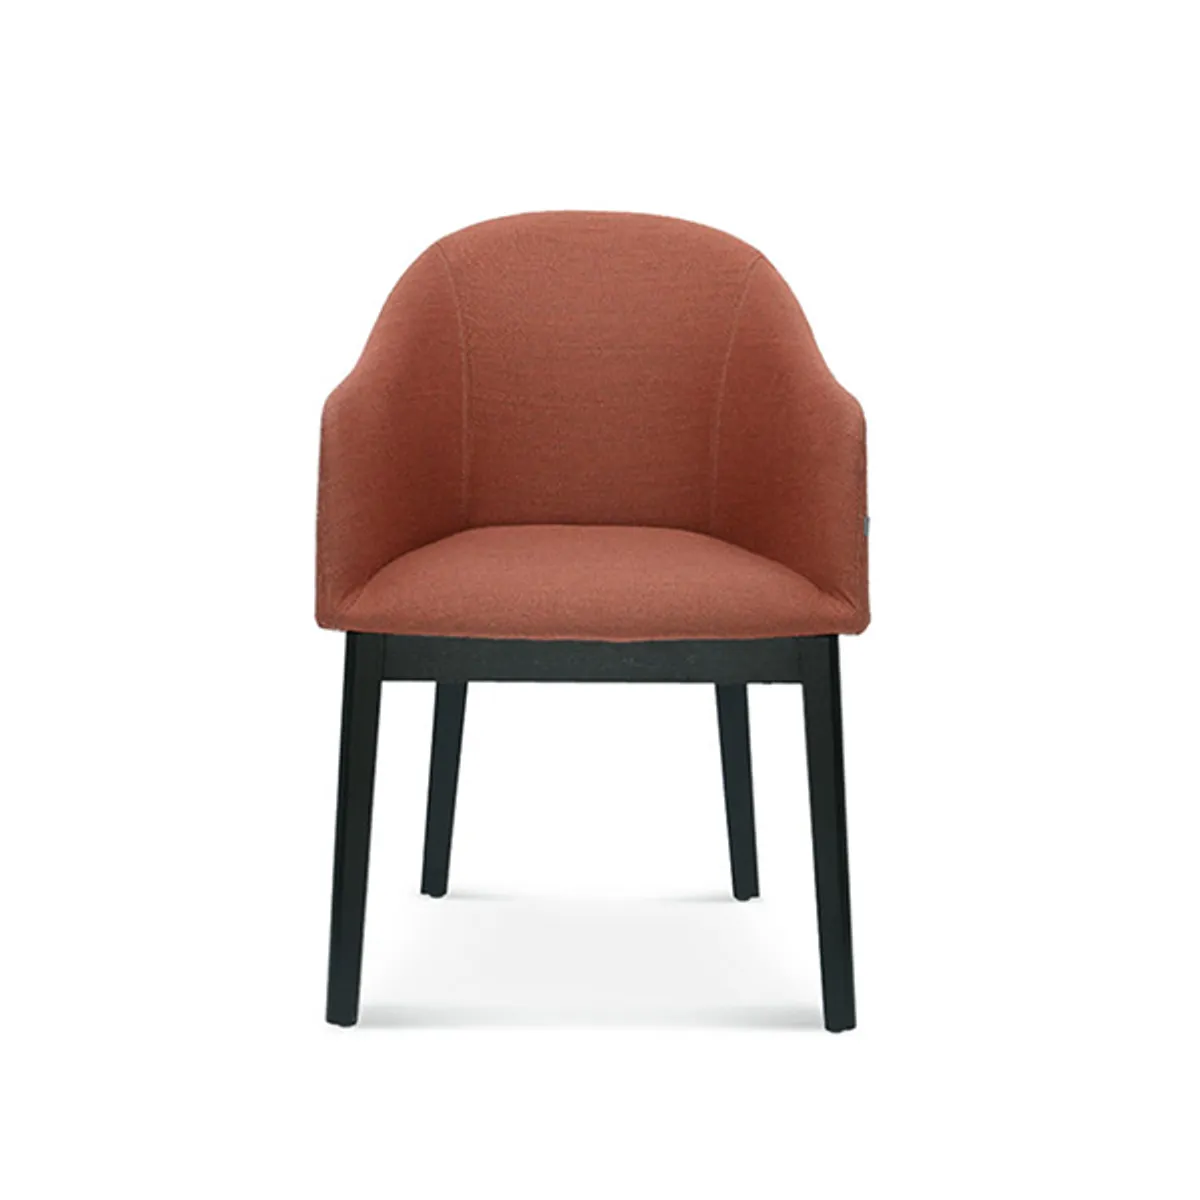 Luca Armchair Upholstered For Commercial Use By Insideoutcontracts